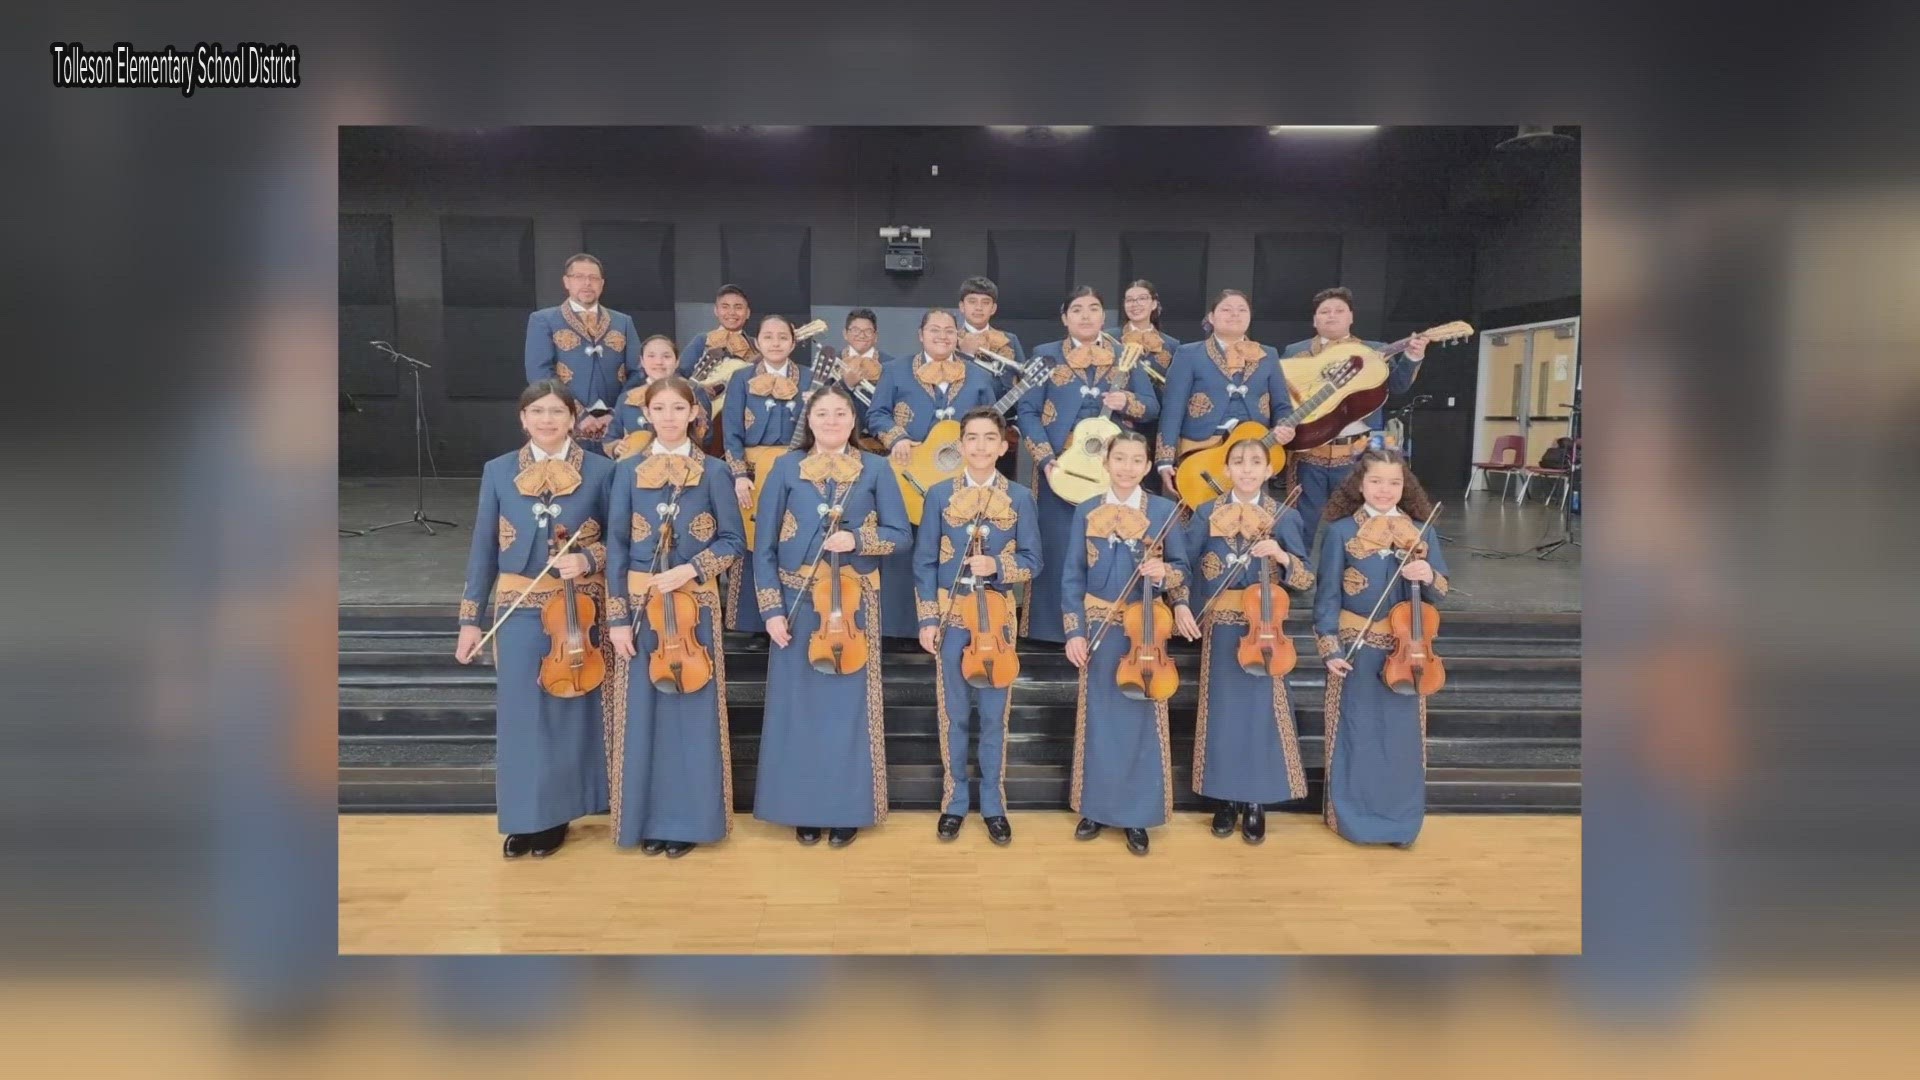 Students at Desert Oasis Elementary School in Tolleson are part of a school Mariachi band that will perform at the Easter celebration at the White House.